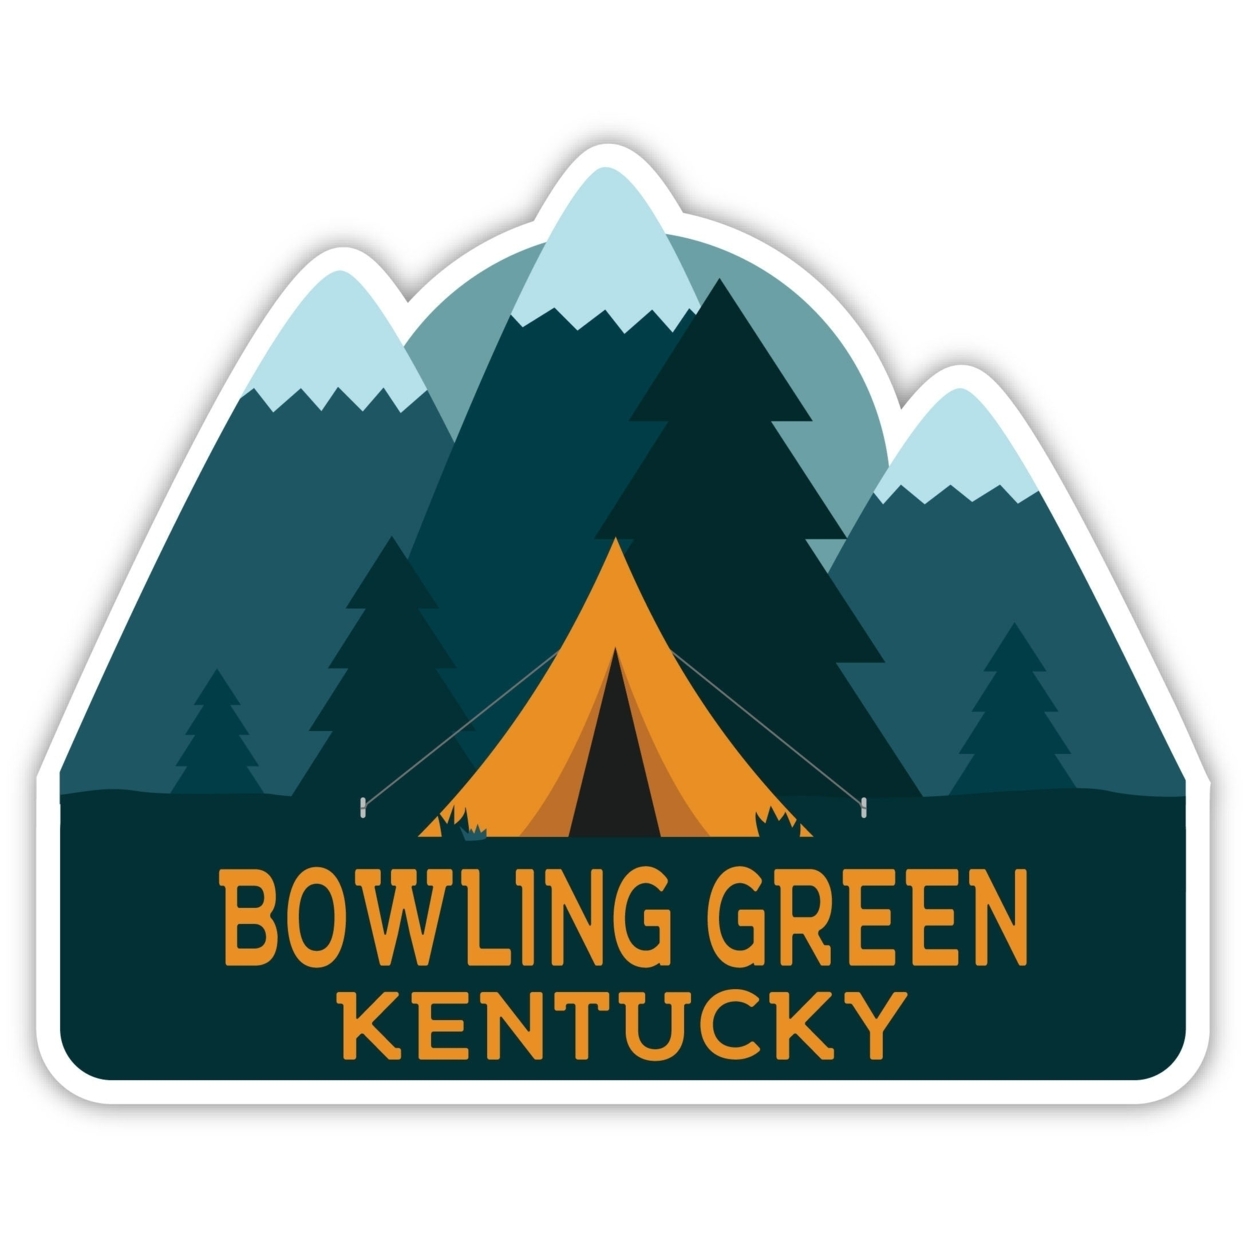 Bowling Green Kentucky Souvenir Decorative Stickers (Choose Theme And Size) - Single Unit, 10-Inch, Tent